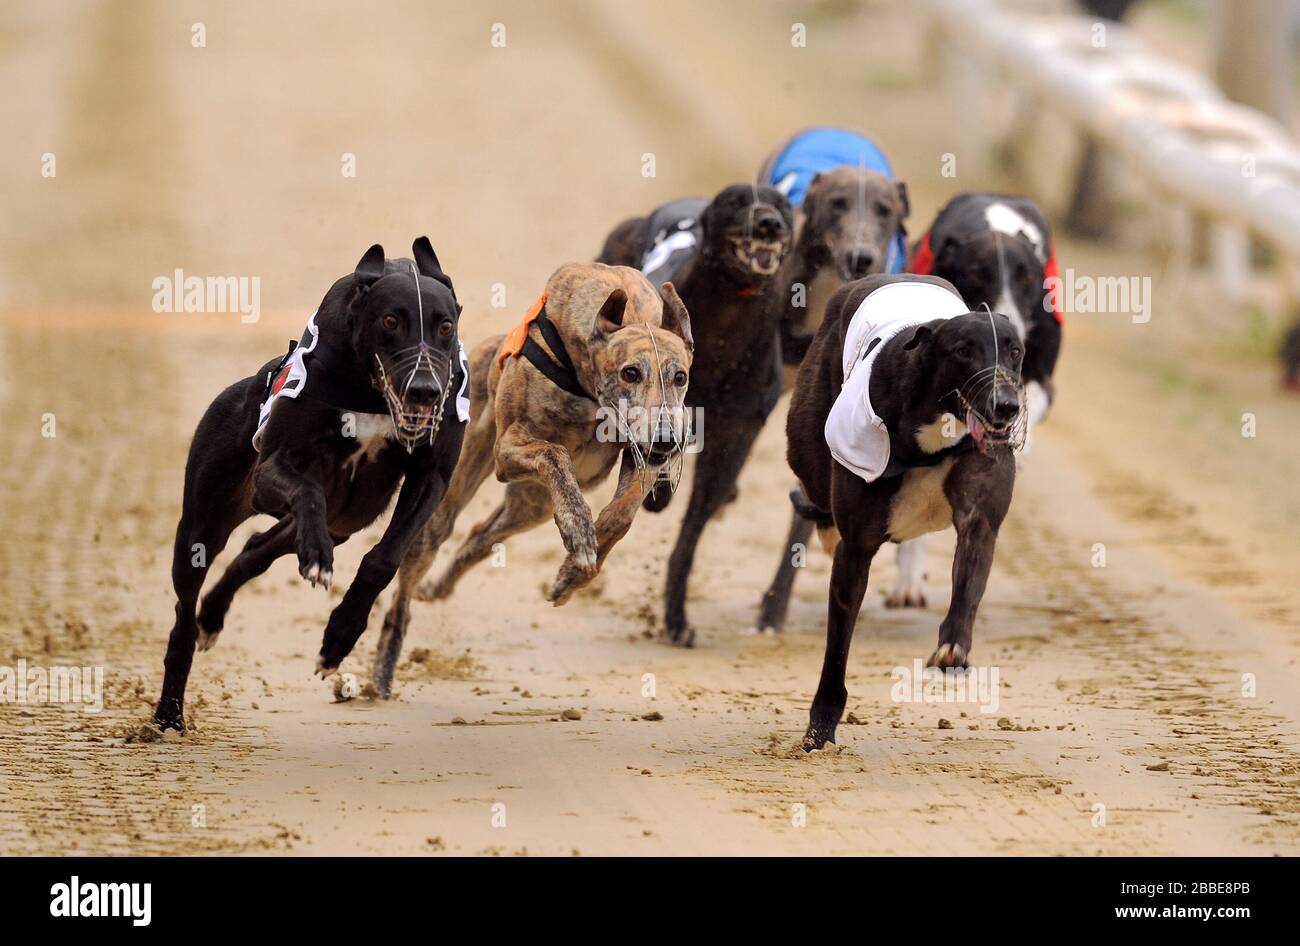 Droopys Jet (no.6 black/white), Skate On (no.5 orange), Kereight King (no.4 black), Kilara Missy (no.3 white), Teejays Bluehawk (no.2 blue) and Tyrur Sugar Ray (no.1 red) in action during the William Hill Derby 3rd Round Heat 1 Stock Photo